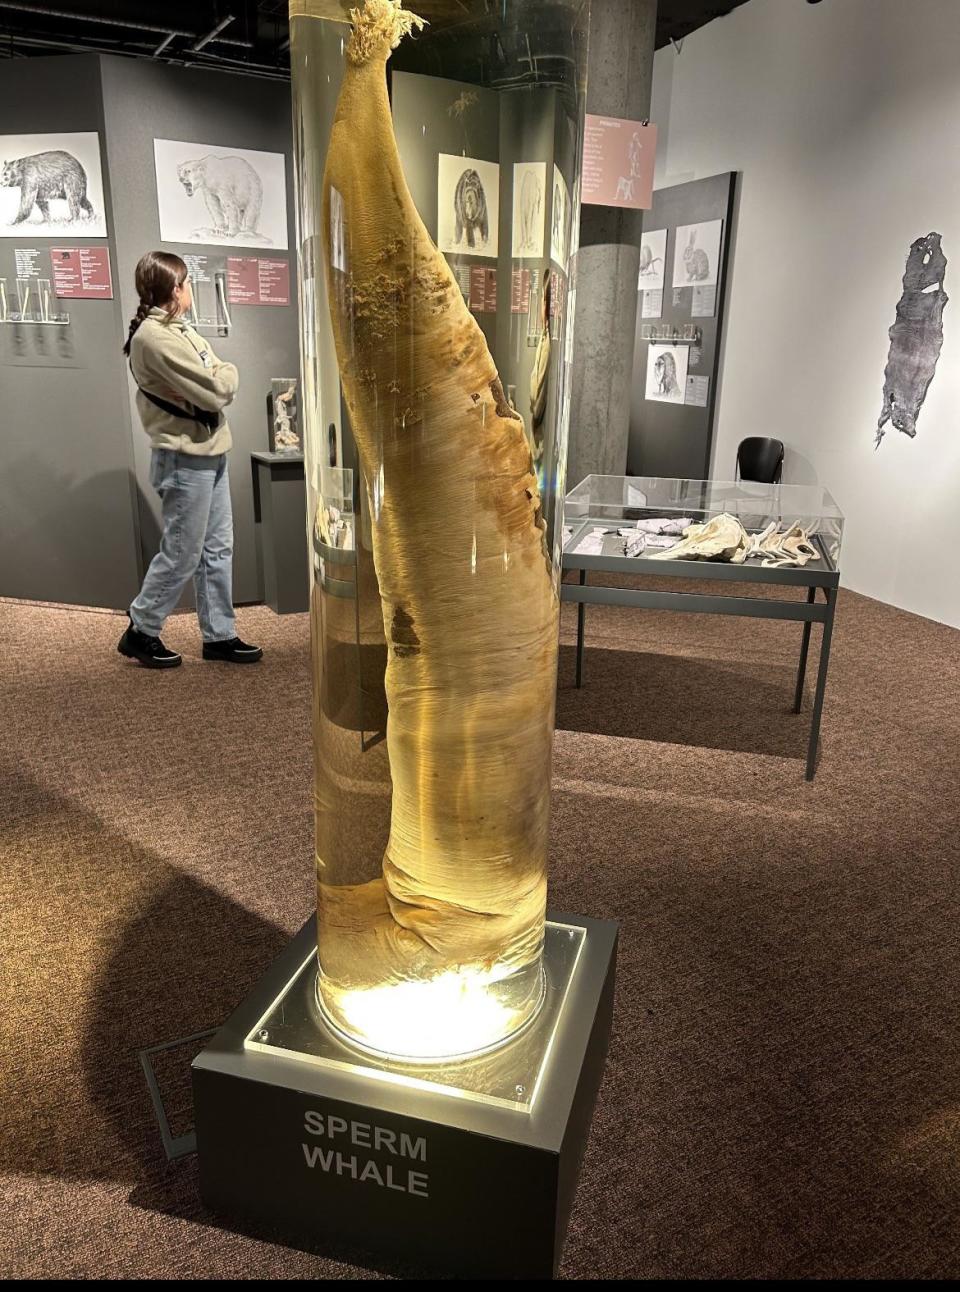 A sperm whale penis behind glass in a museum that's taller than a woman standing nearby